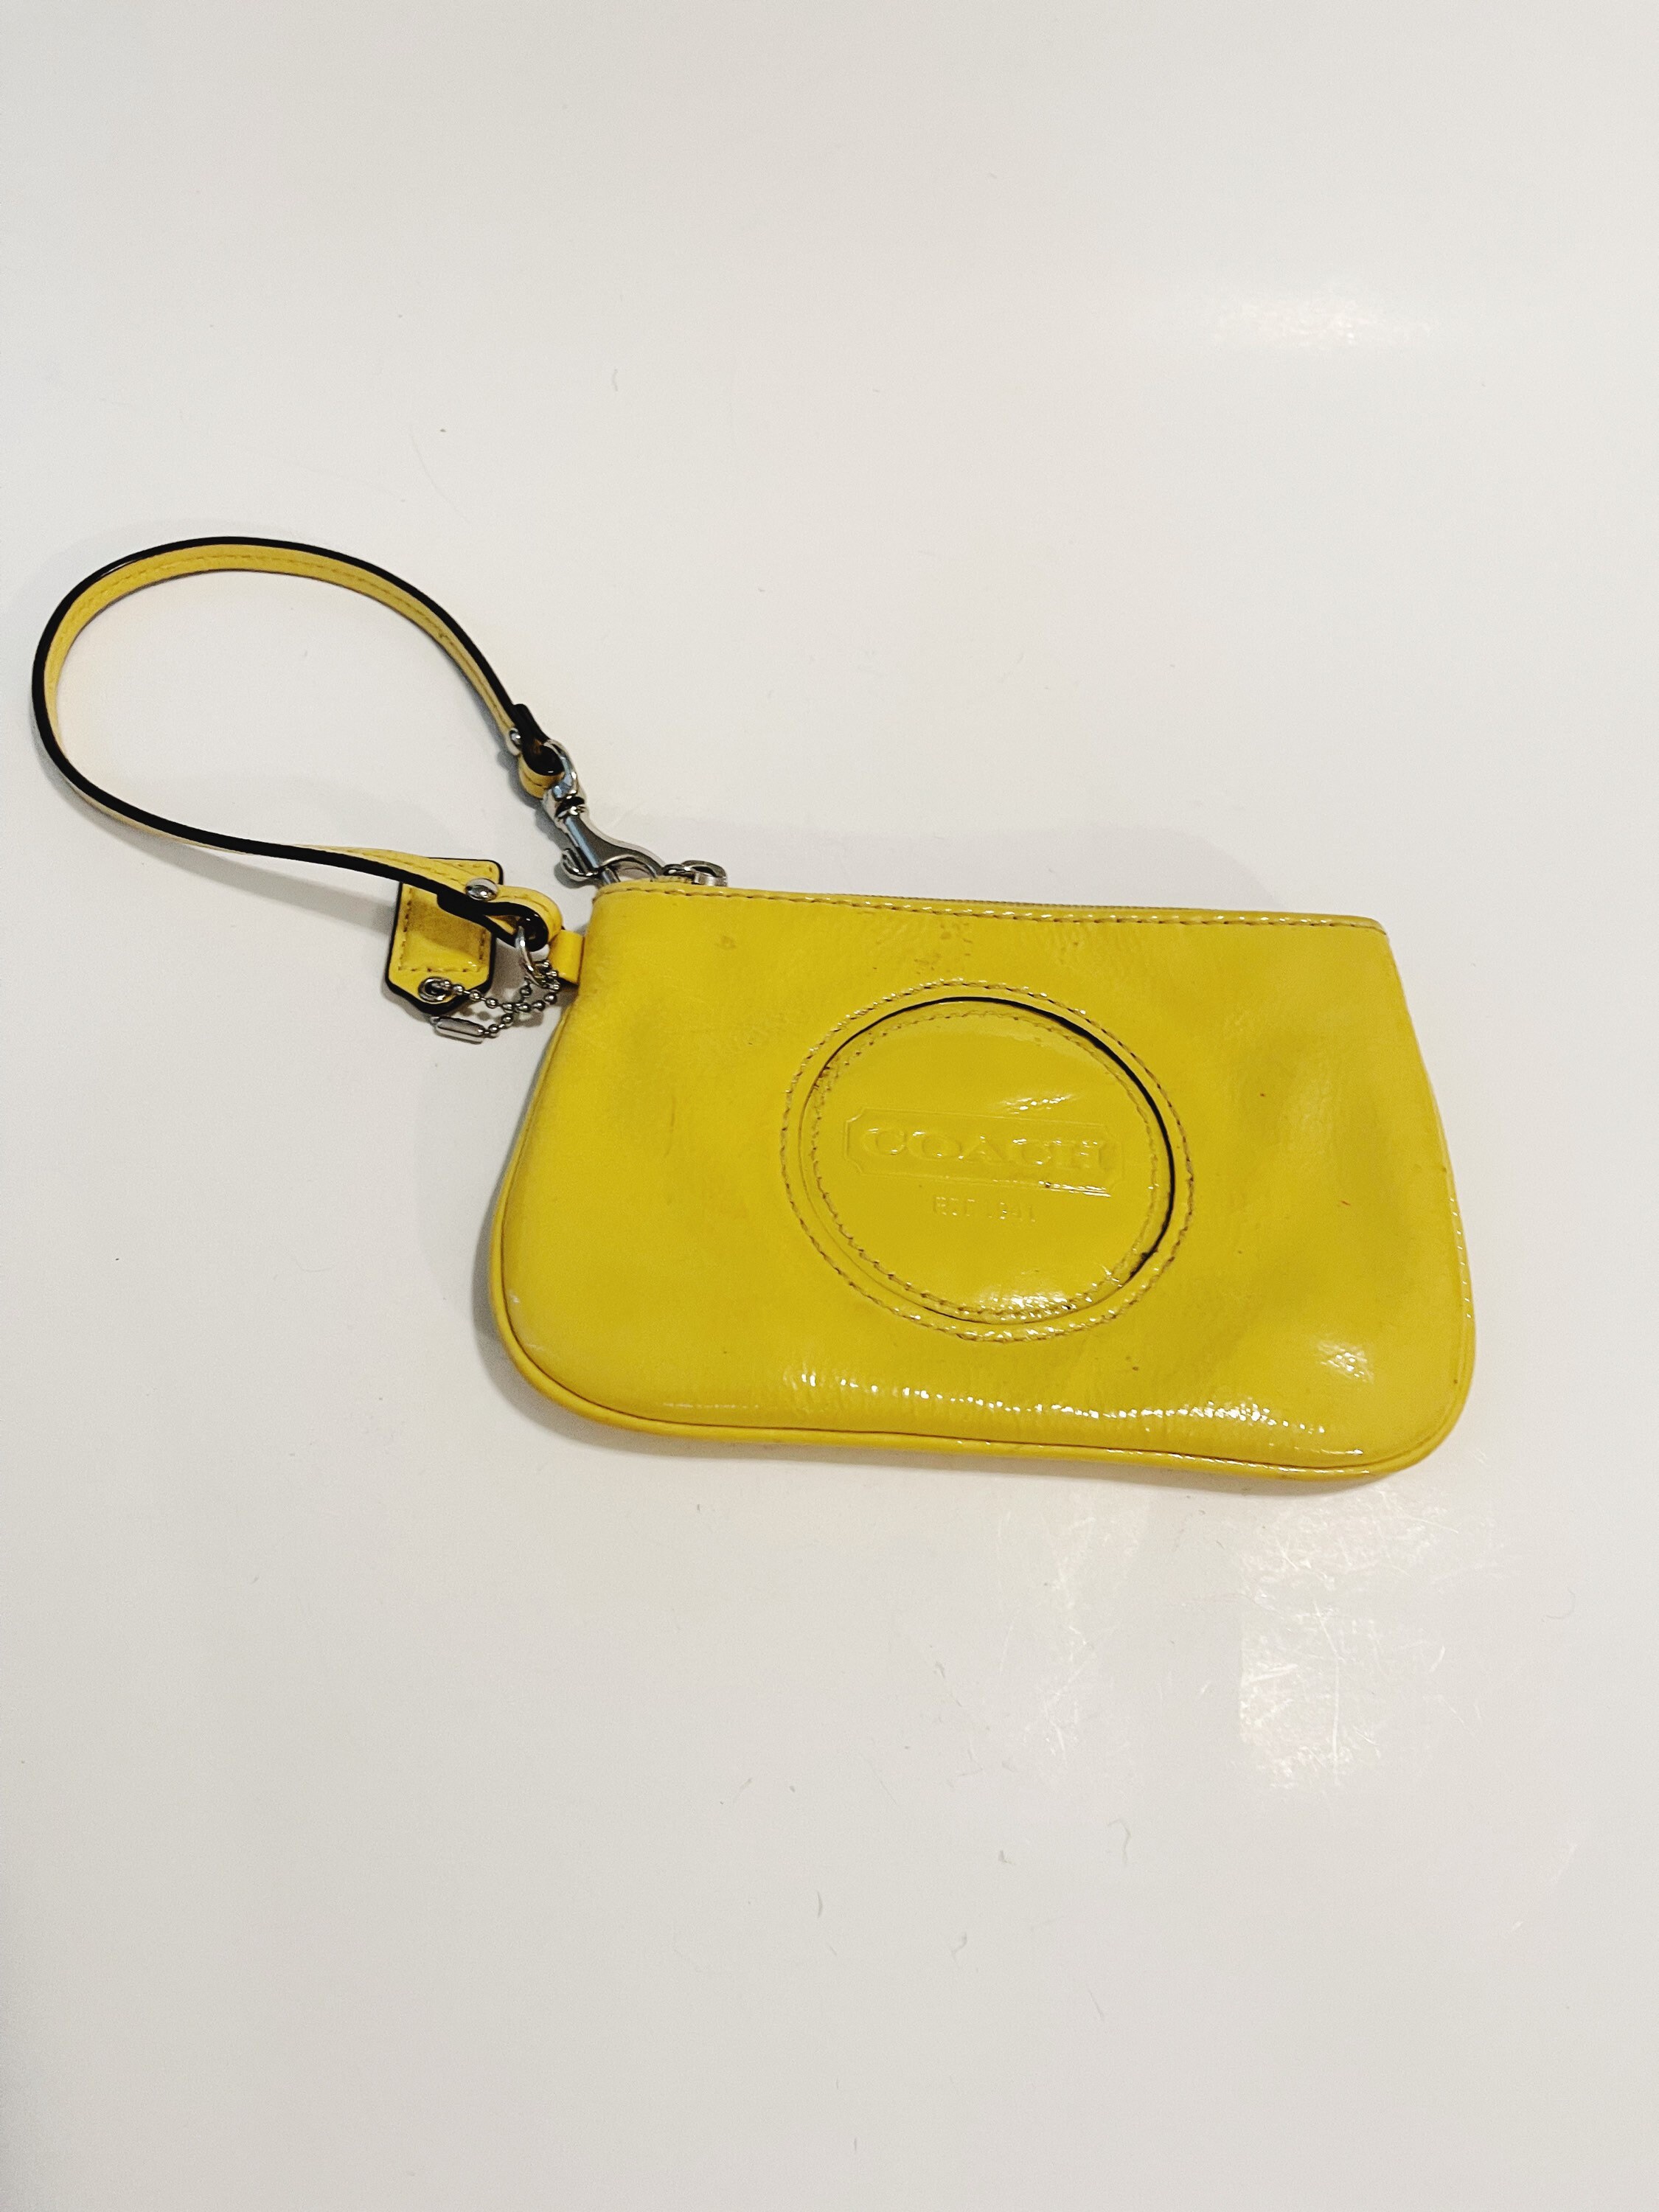 Yellow Wristlet Small Handheld Wallet Patent Leather Coach - Etsy